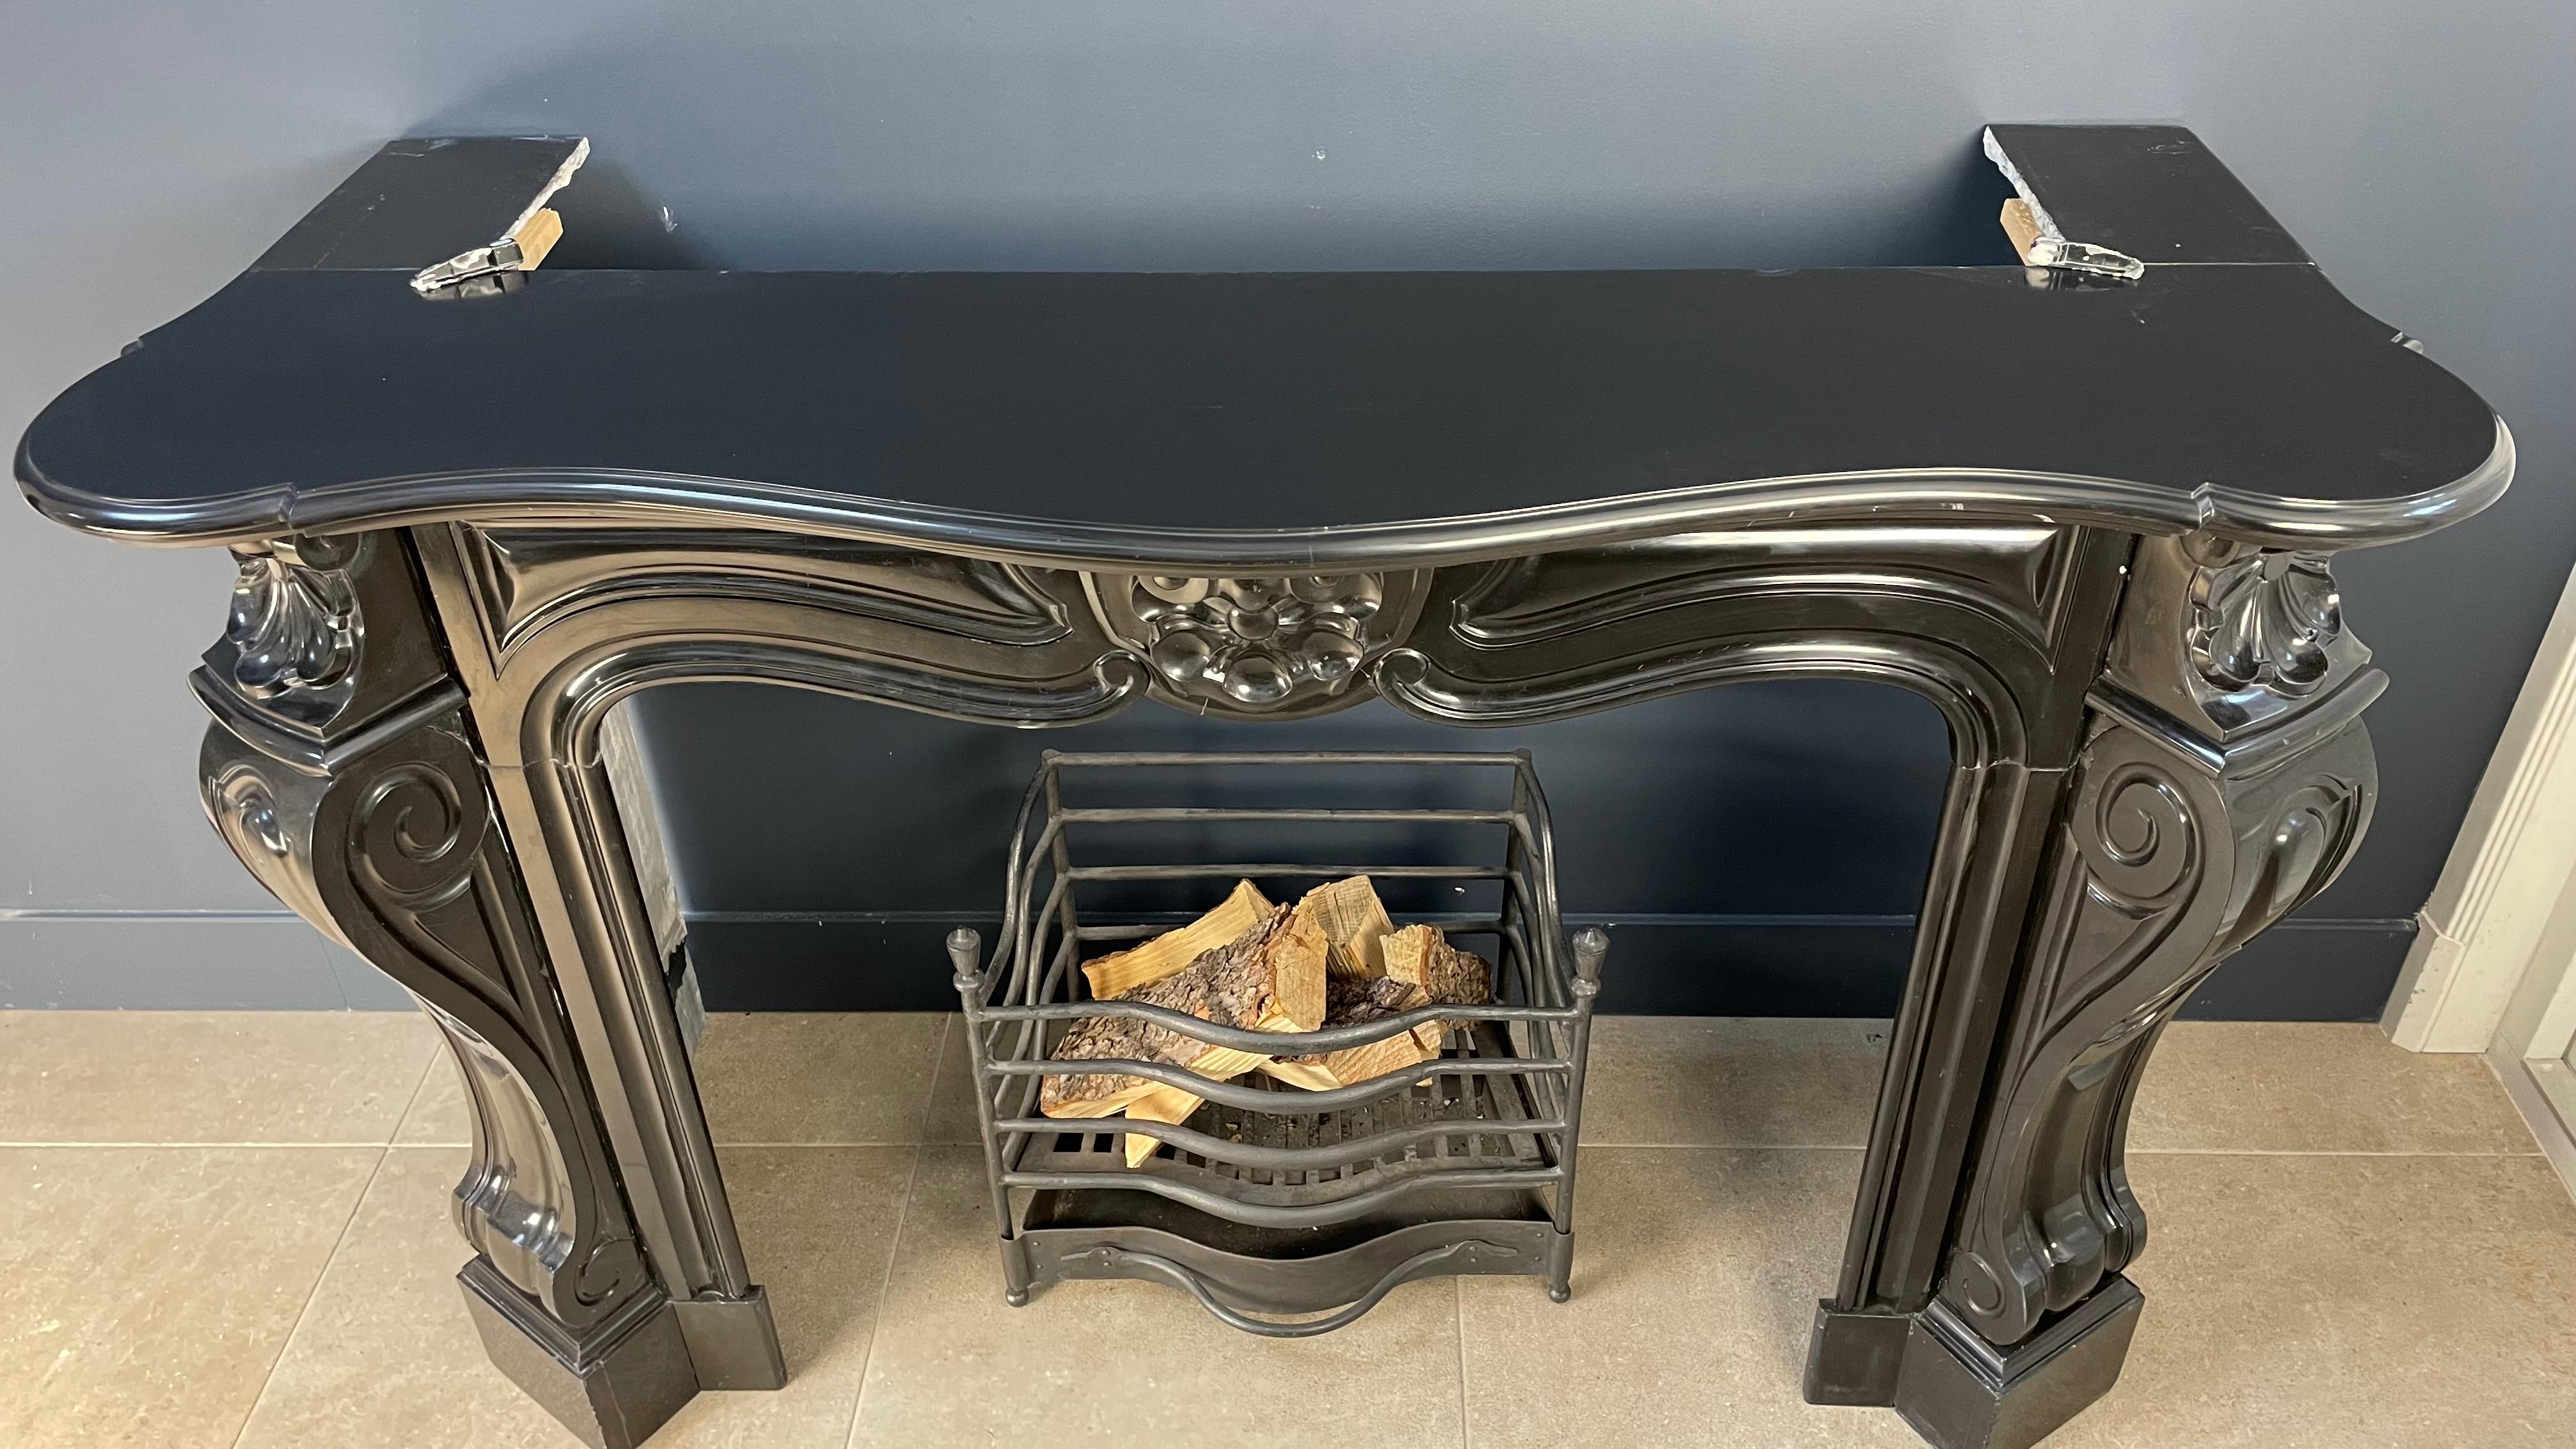 Introducing a sumptuous antique fireplace crafted from exquisite black gold Noir de Mazy marble. This opulent circular masterpiece exudes luxury with its uniquely angled consoles, elevating its aesthetic allure. Beyond the classic shell design, the